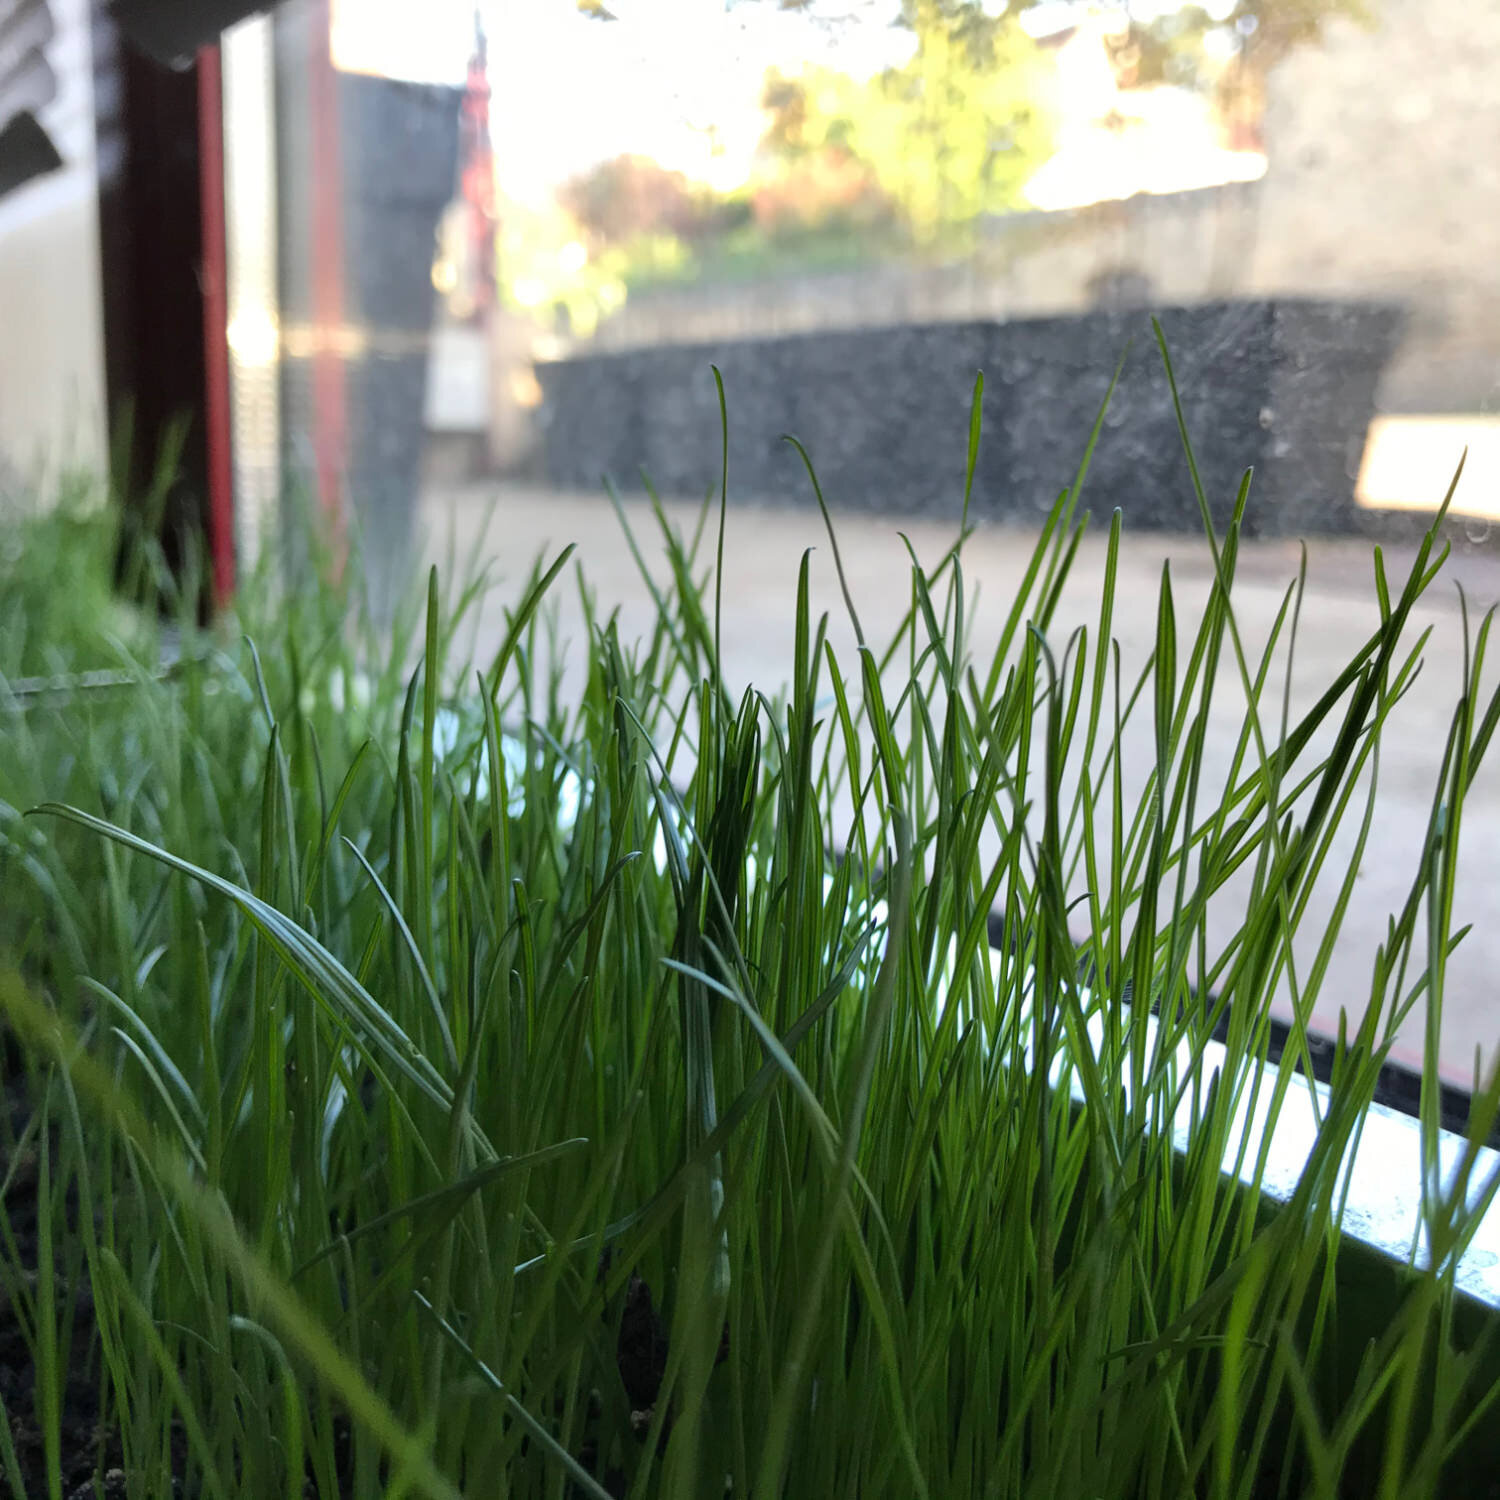 Sept 7 indoor lawns sprouted